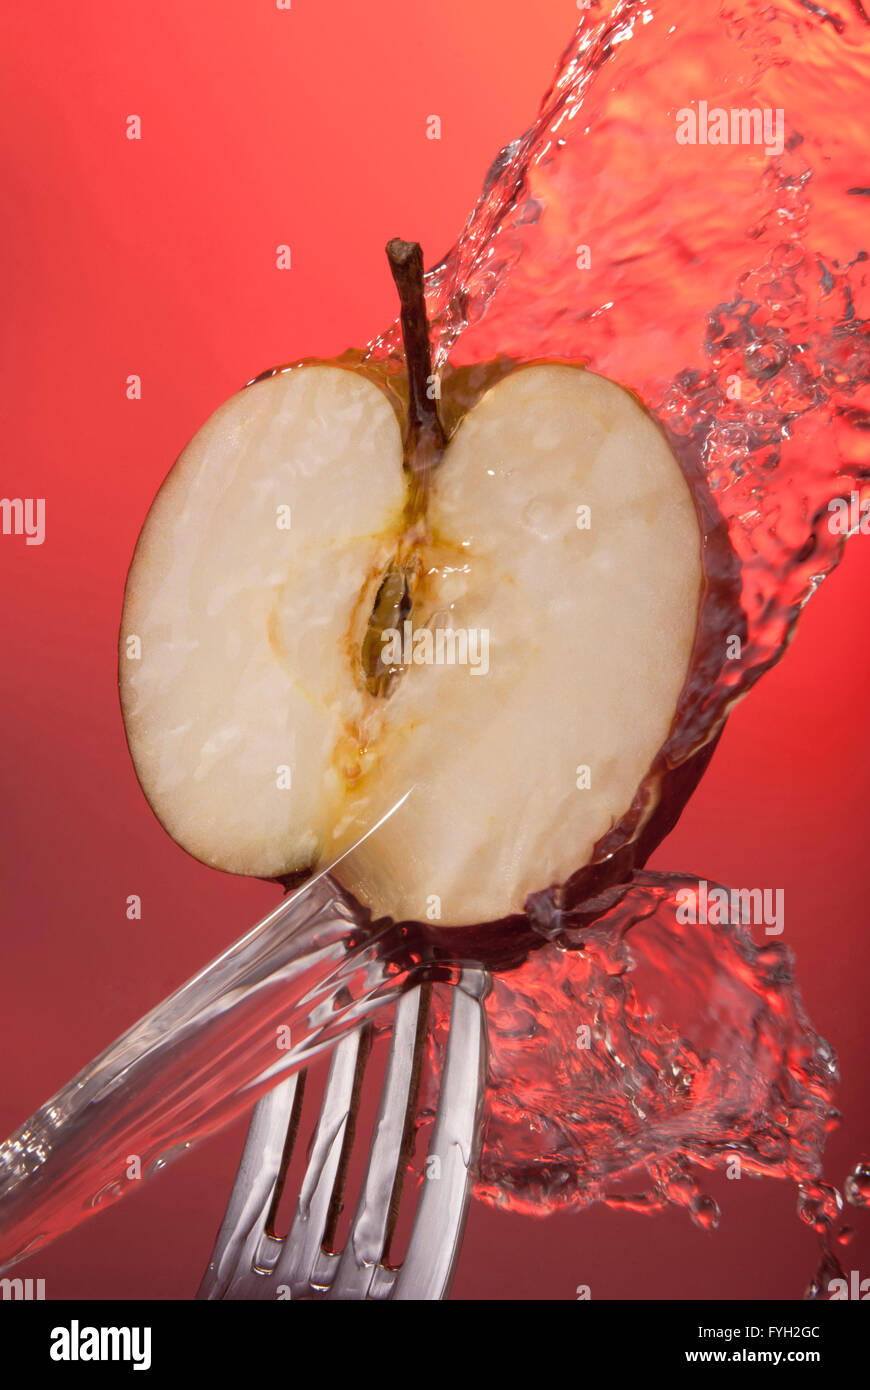 Red apple cut in half on fork with water splash, color background concept photo. Ideal for healthy eating campaign. Stock Photo